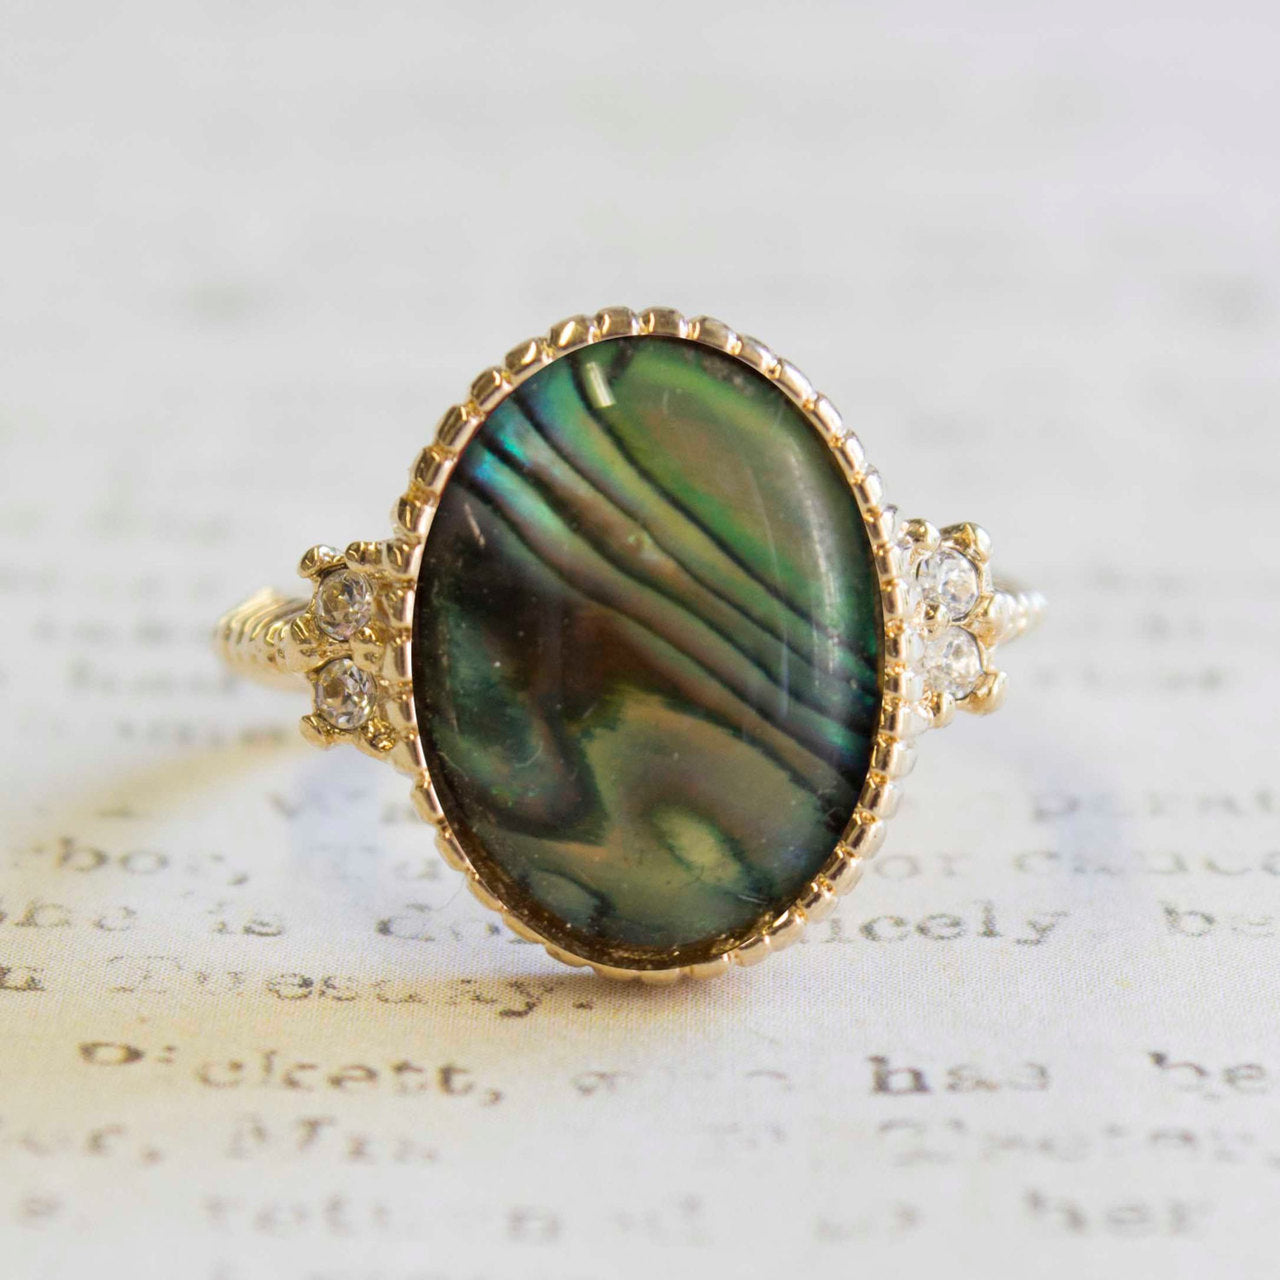 Vintage Art Deco Ring Genuine Abalone Shell and Austrian Crystals 18k Yellow Gold Electroplated Size: 7